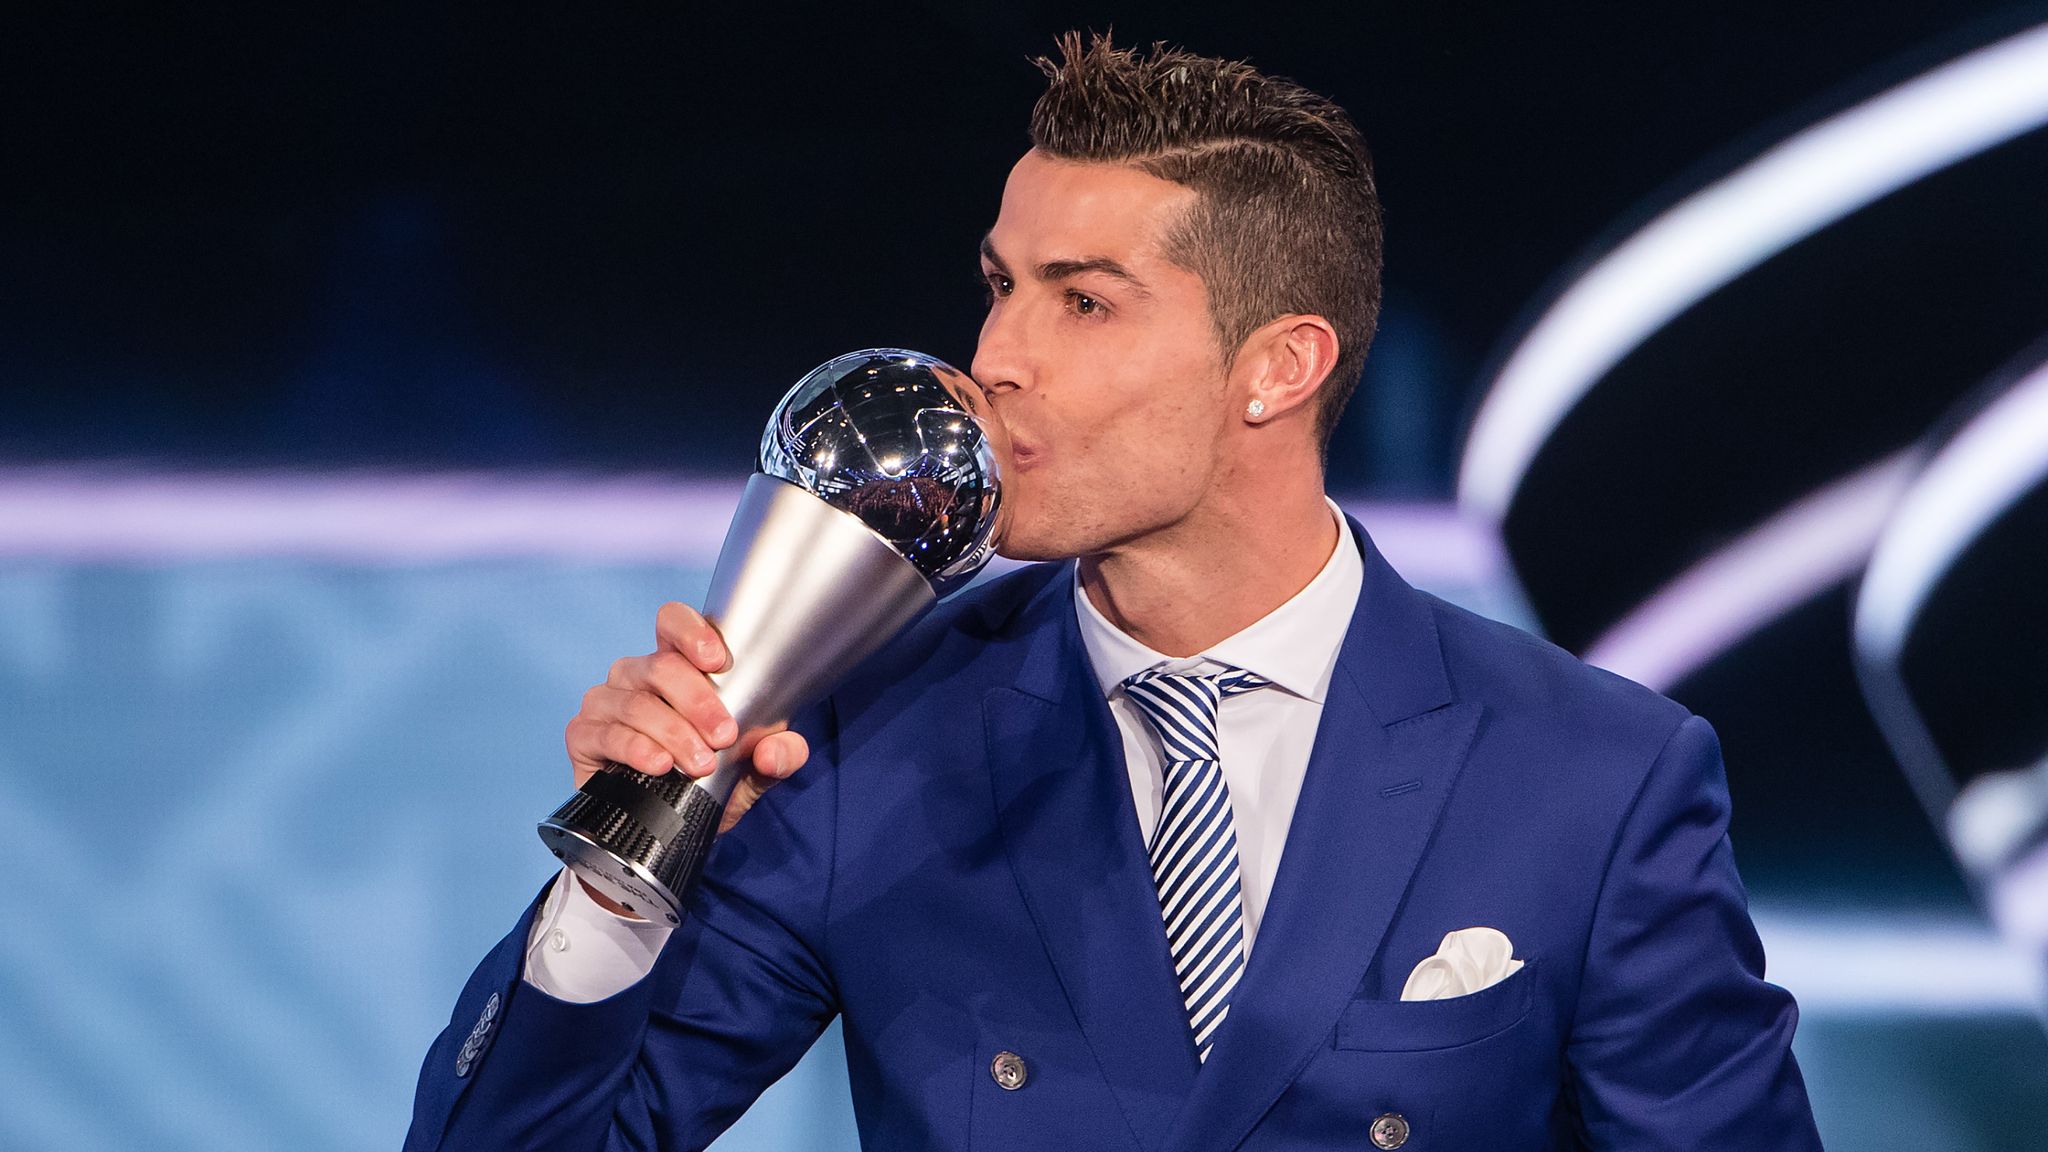 Top 10 most Handsome football players in the World - Cristiano Ronaldo